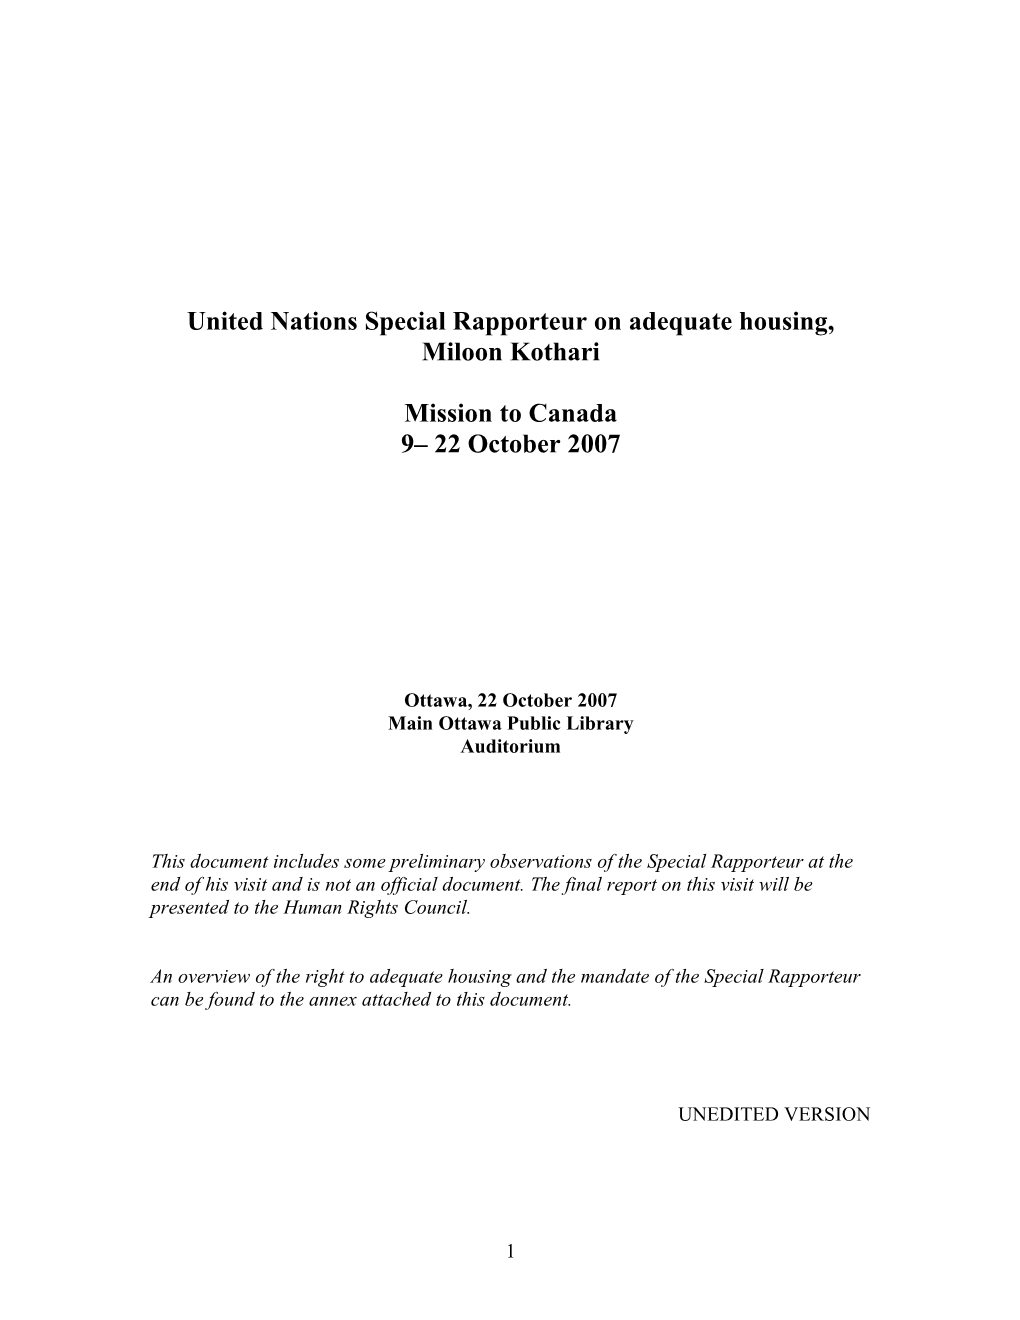 United Nations Special Rapporteur on Adequate Housing, Miloon Kothari